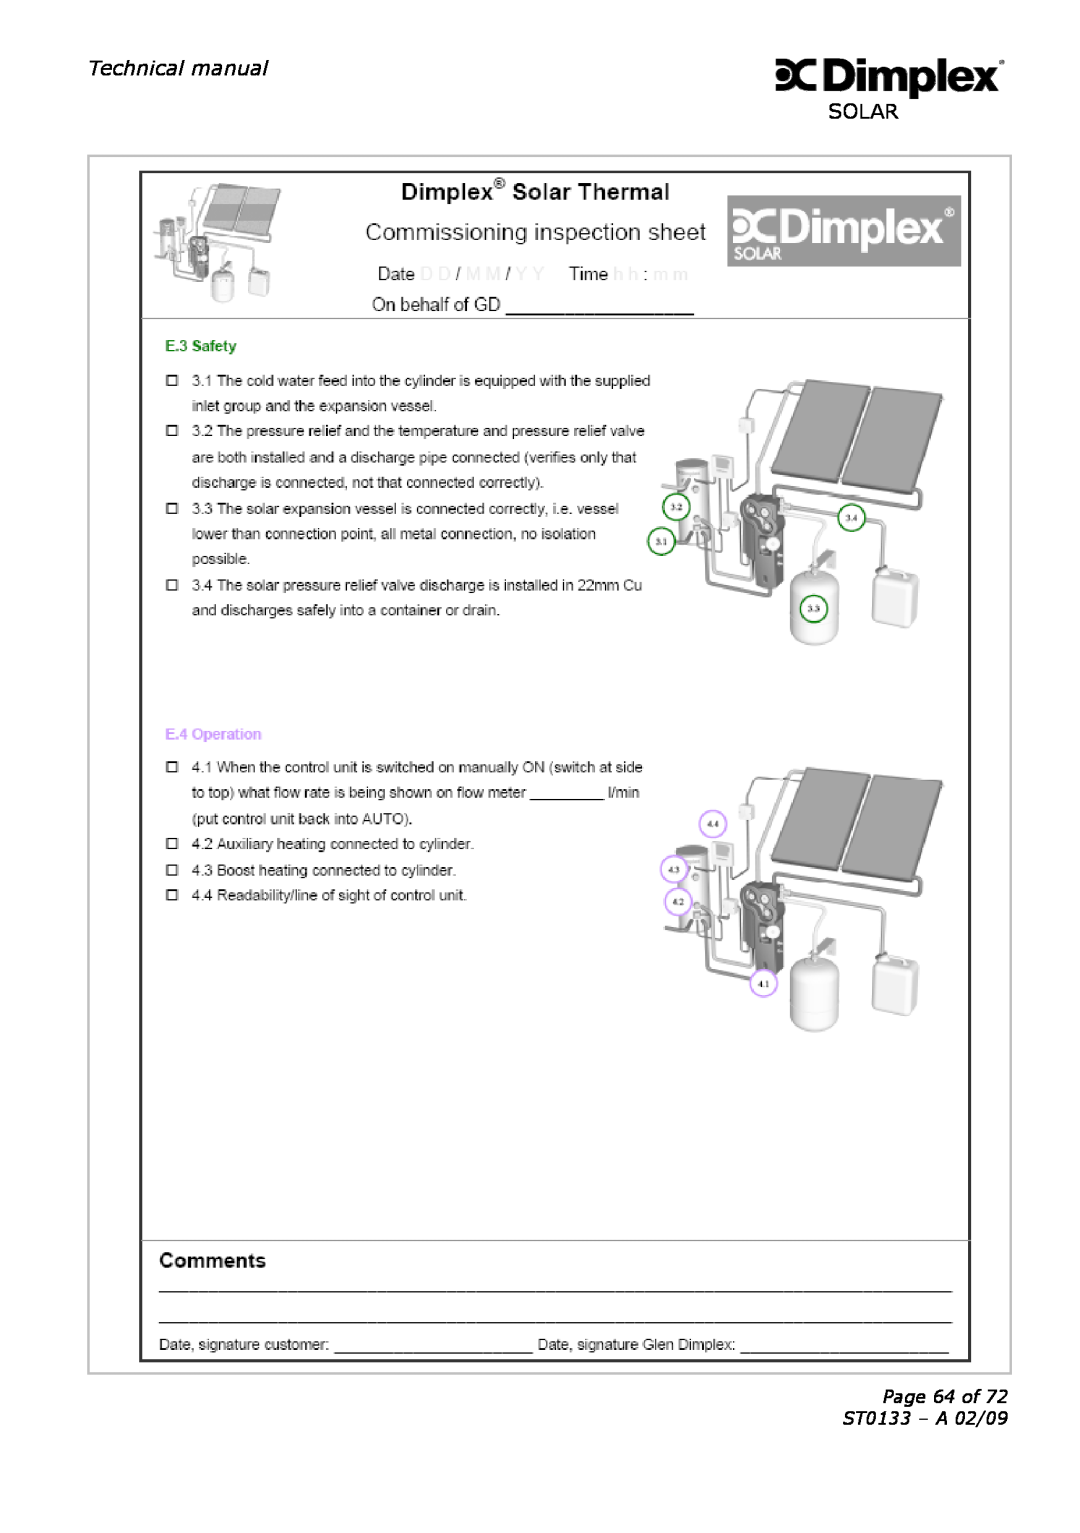 Dimplex technical manual Technical manual, Page 64 of ST0133 - A 02/09 